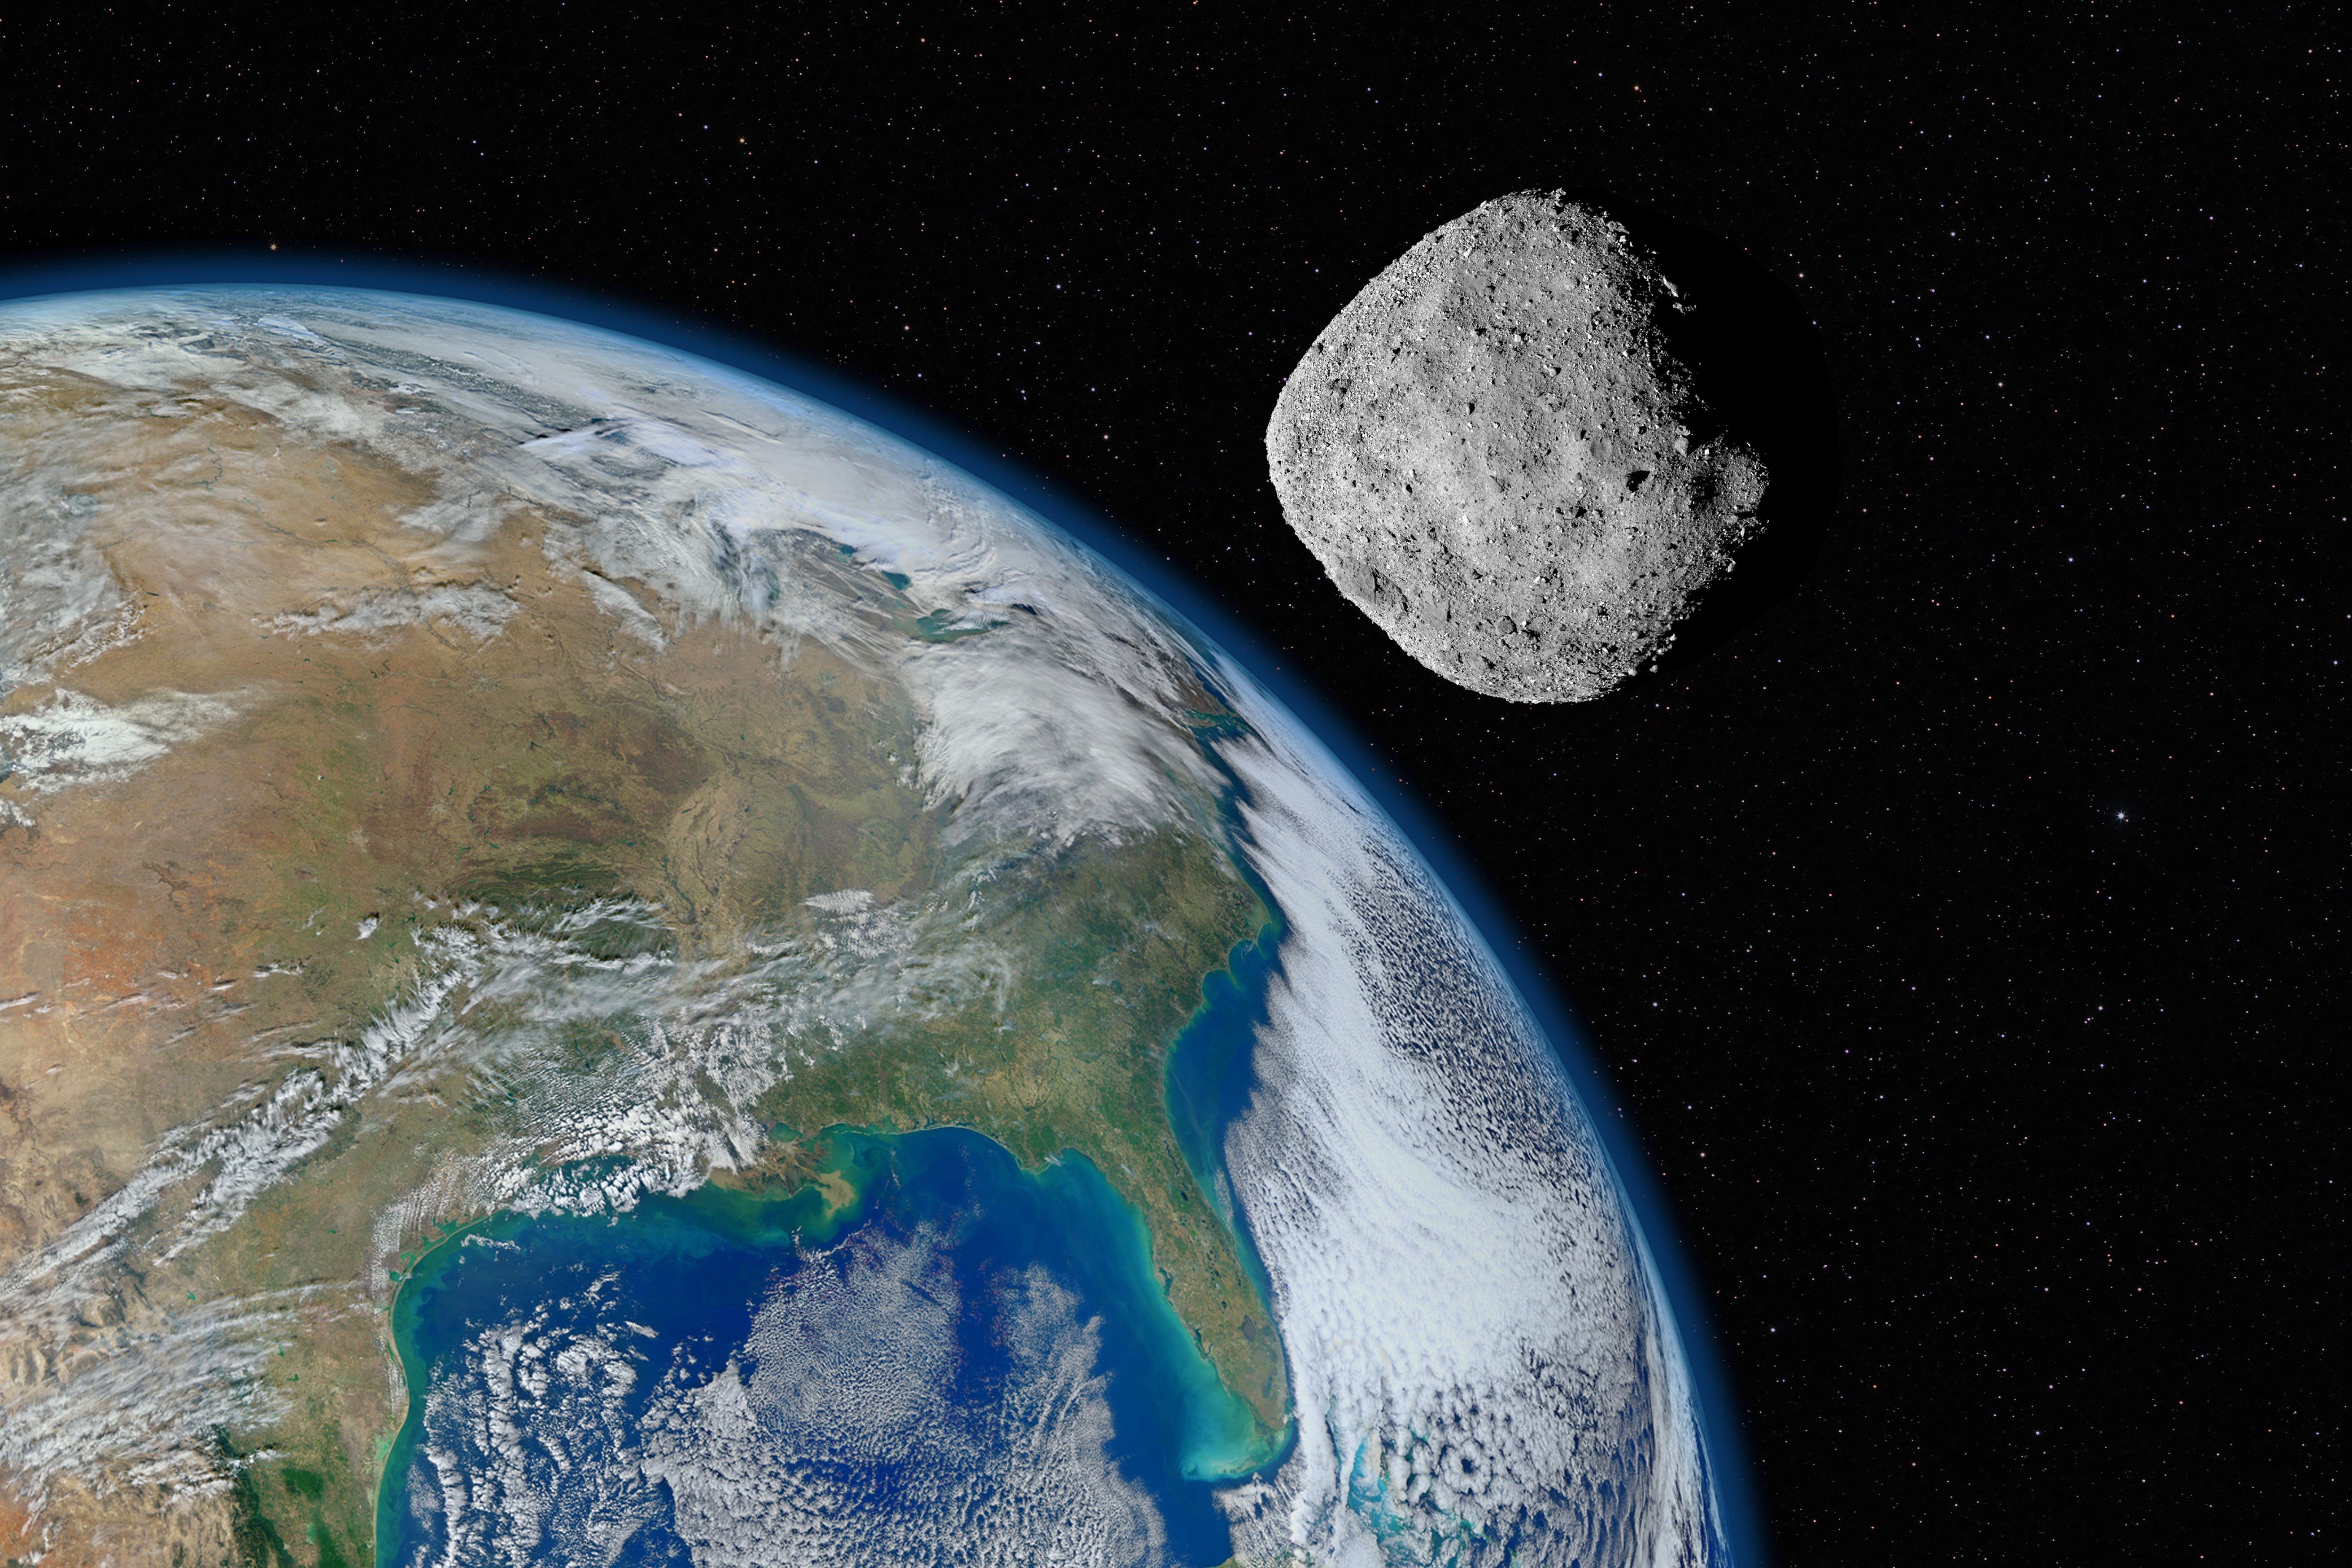 An artist’s conception of an asteroid passing close to Earth